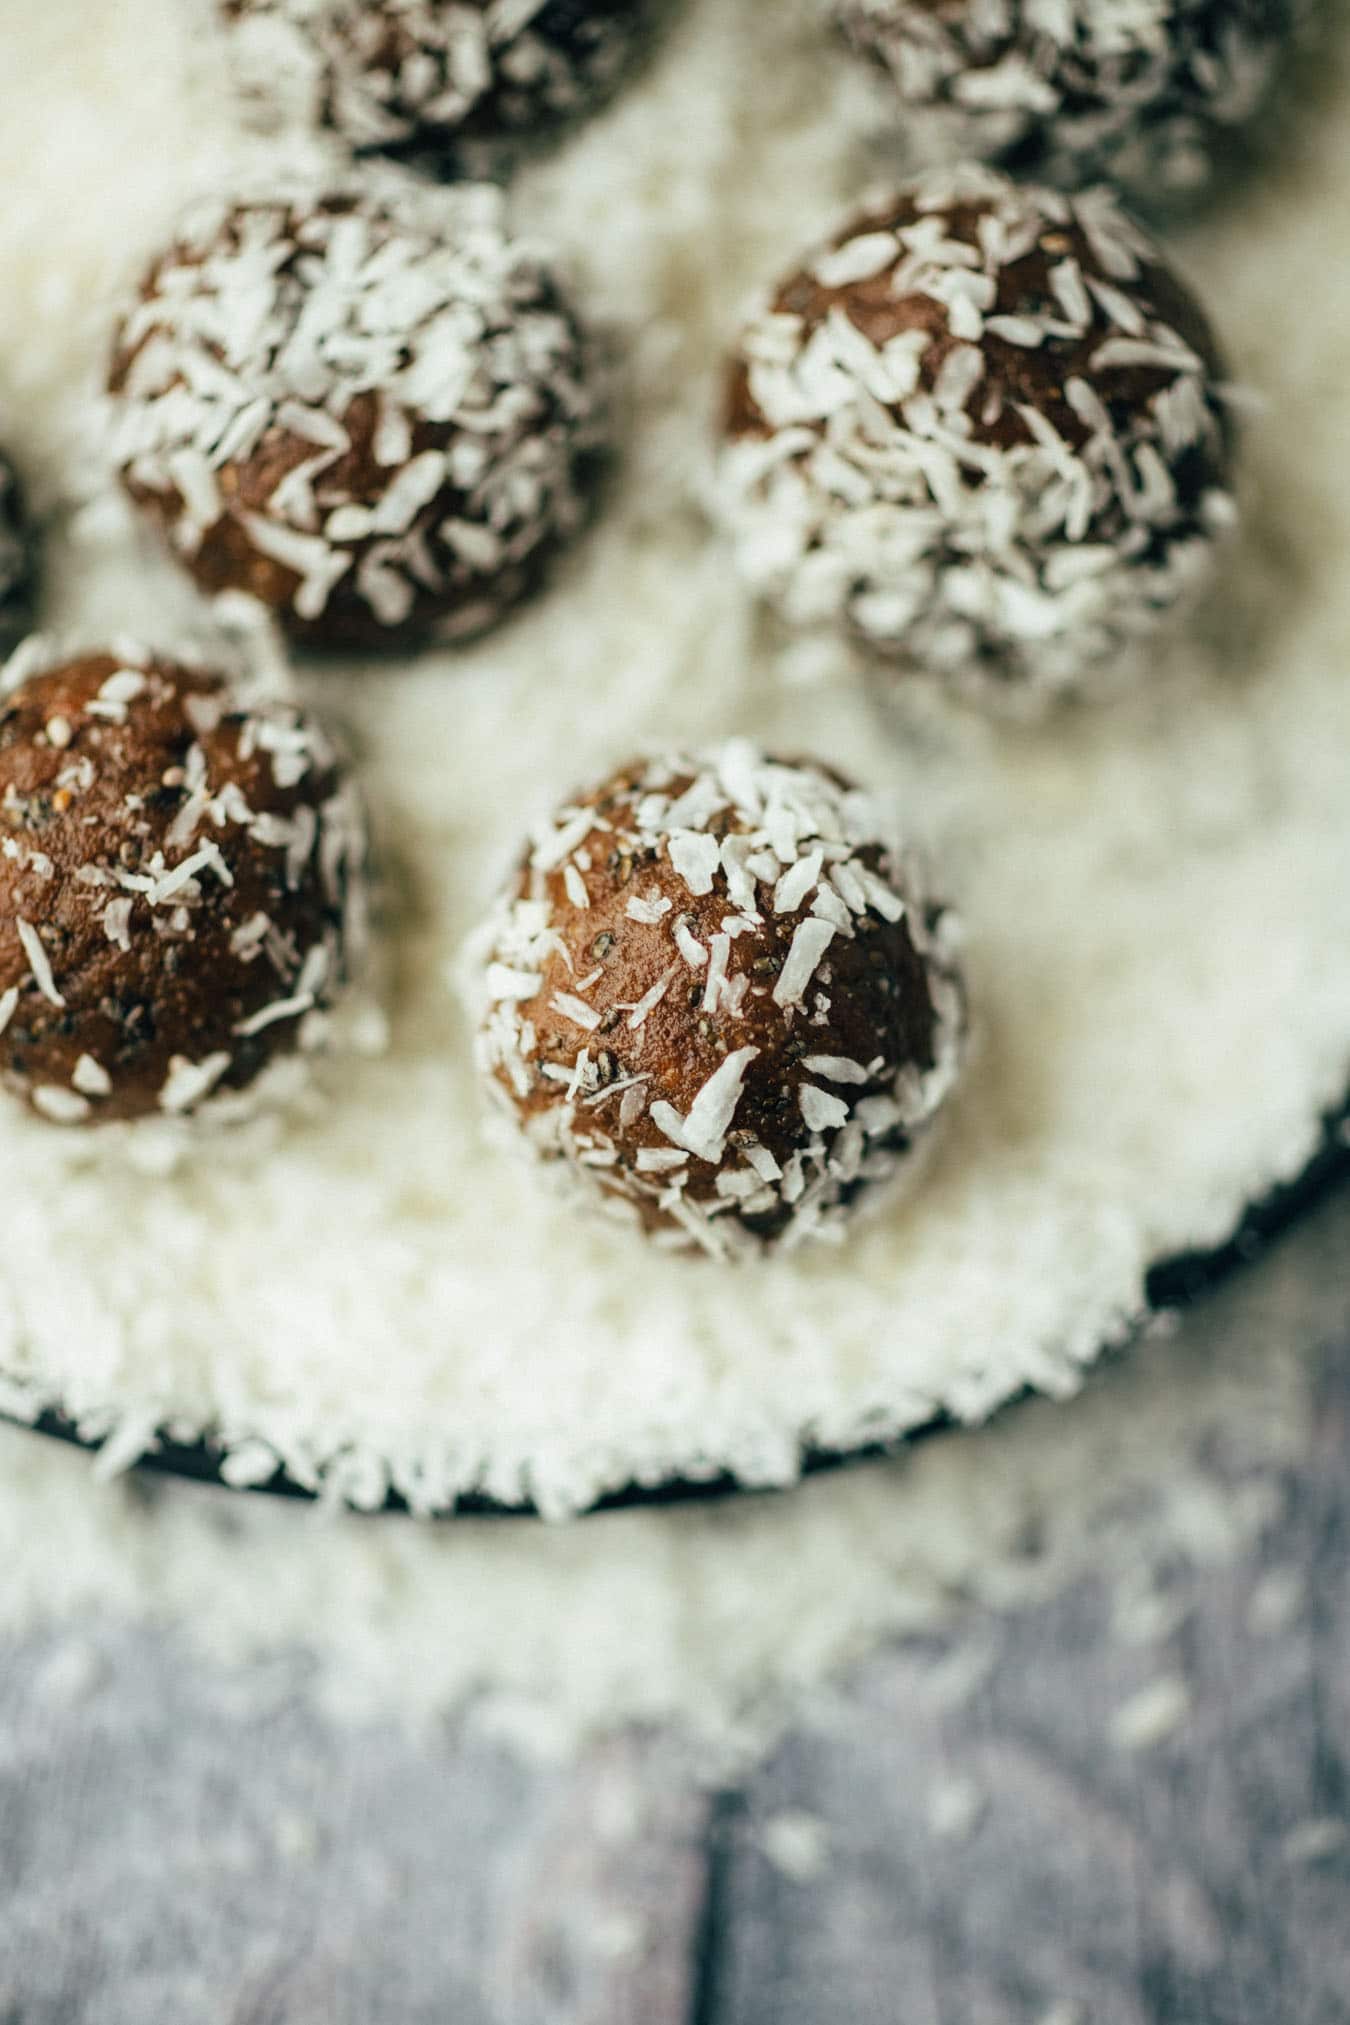 Energy Balls with walnuts and cinnamon (15 minutes)